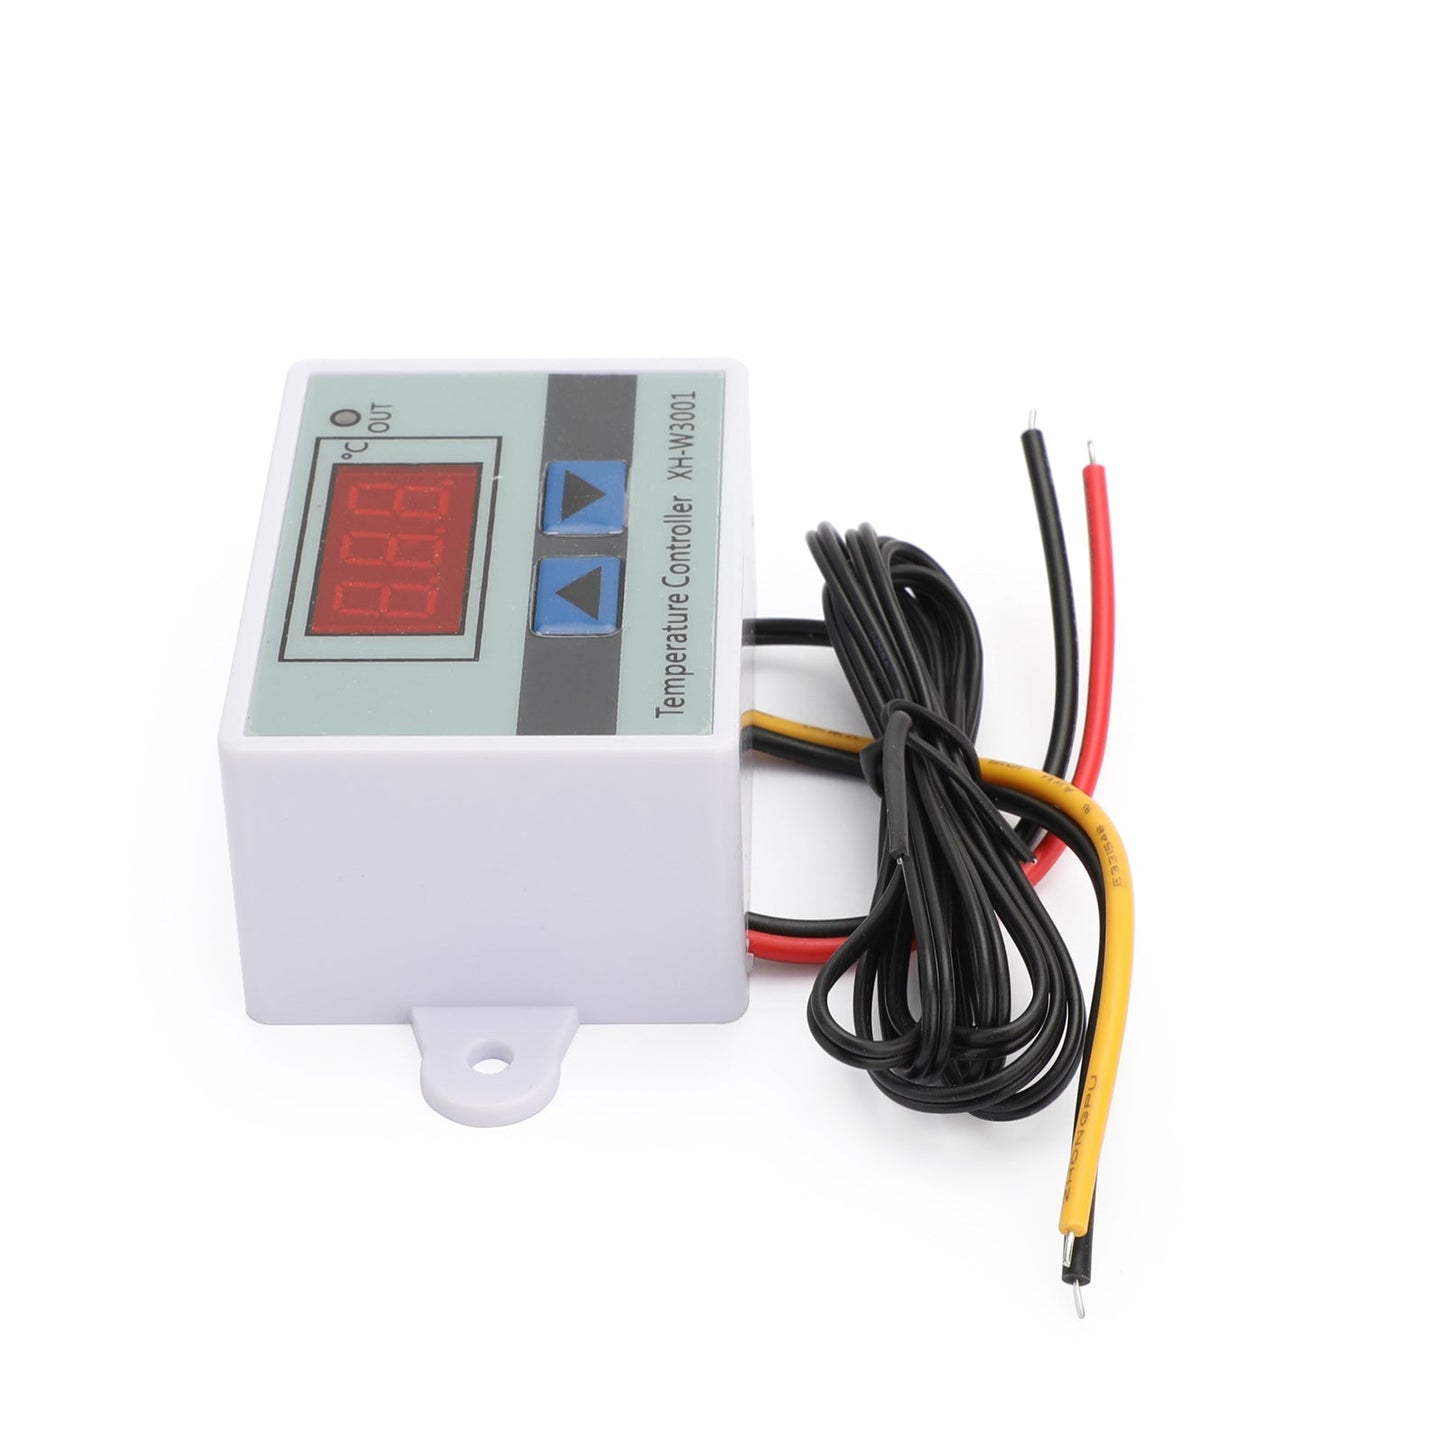 DC 12V Digital LED Temperature Controller Thermostat XH-W3001 Switch Probe